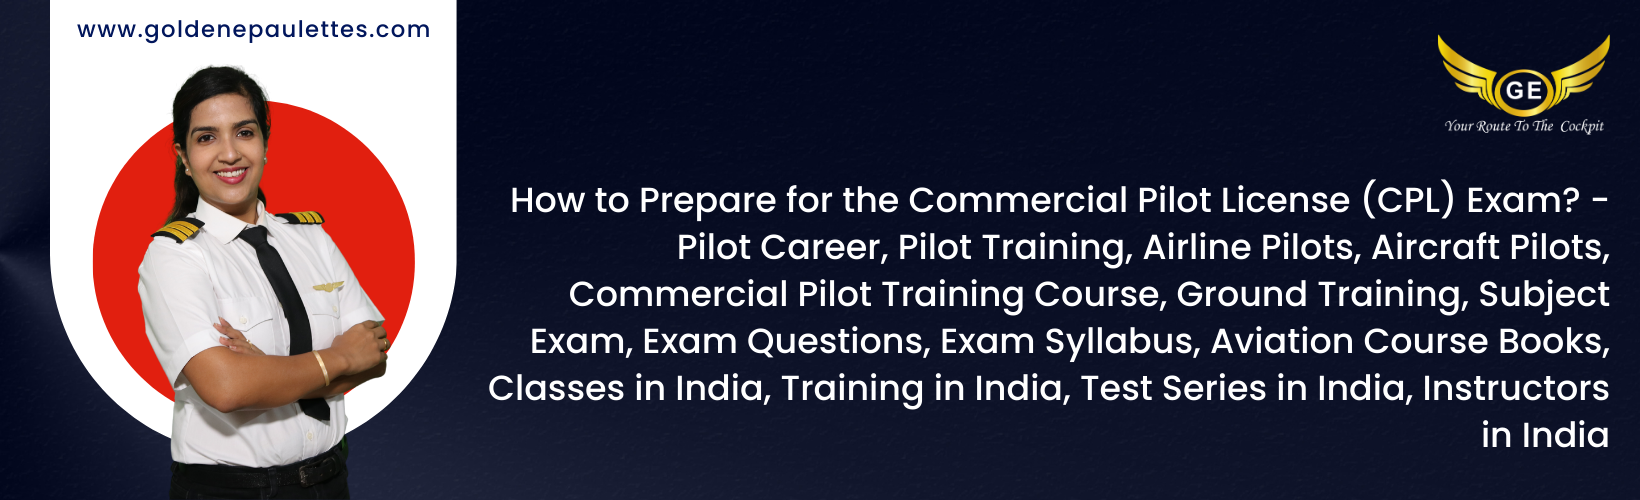 How to Prepare for the Commercial Pilot License (CPL) Exam